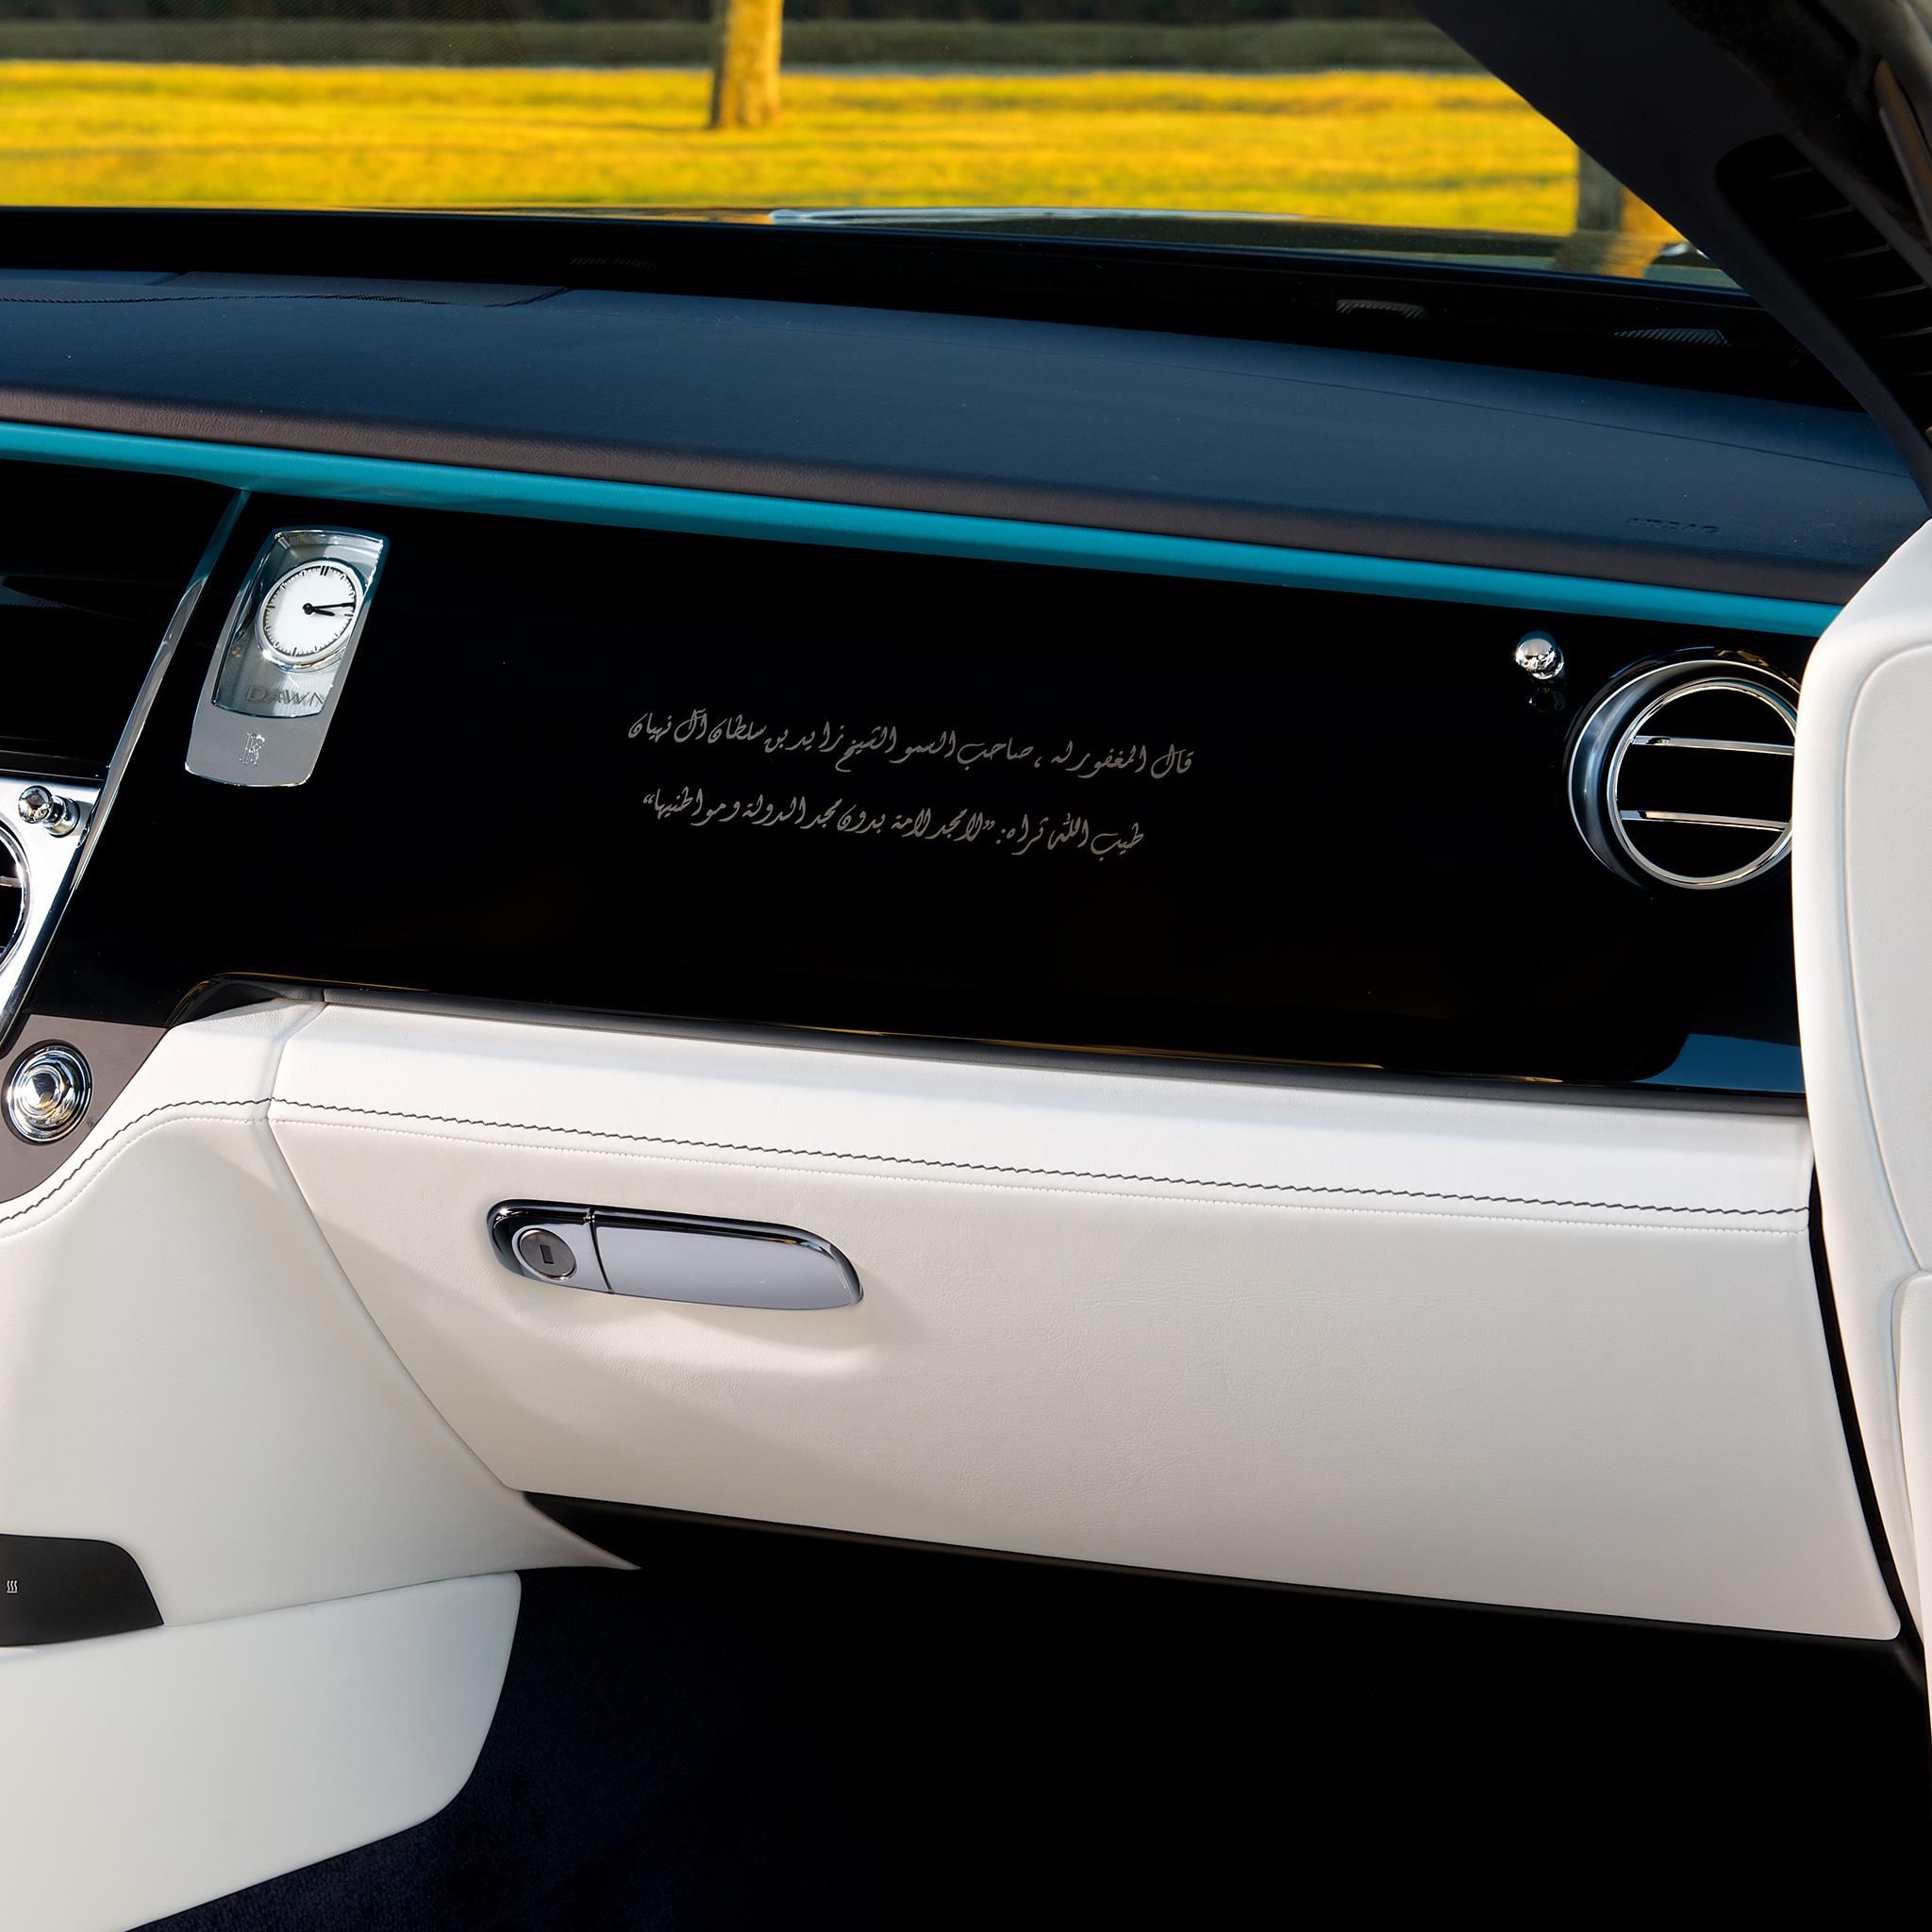 2017 Rolls-Royce Dawn Inspired by Pearling Tradition